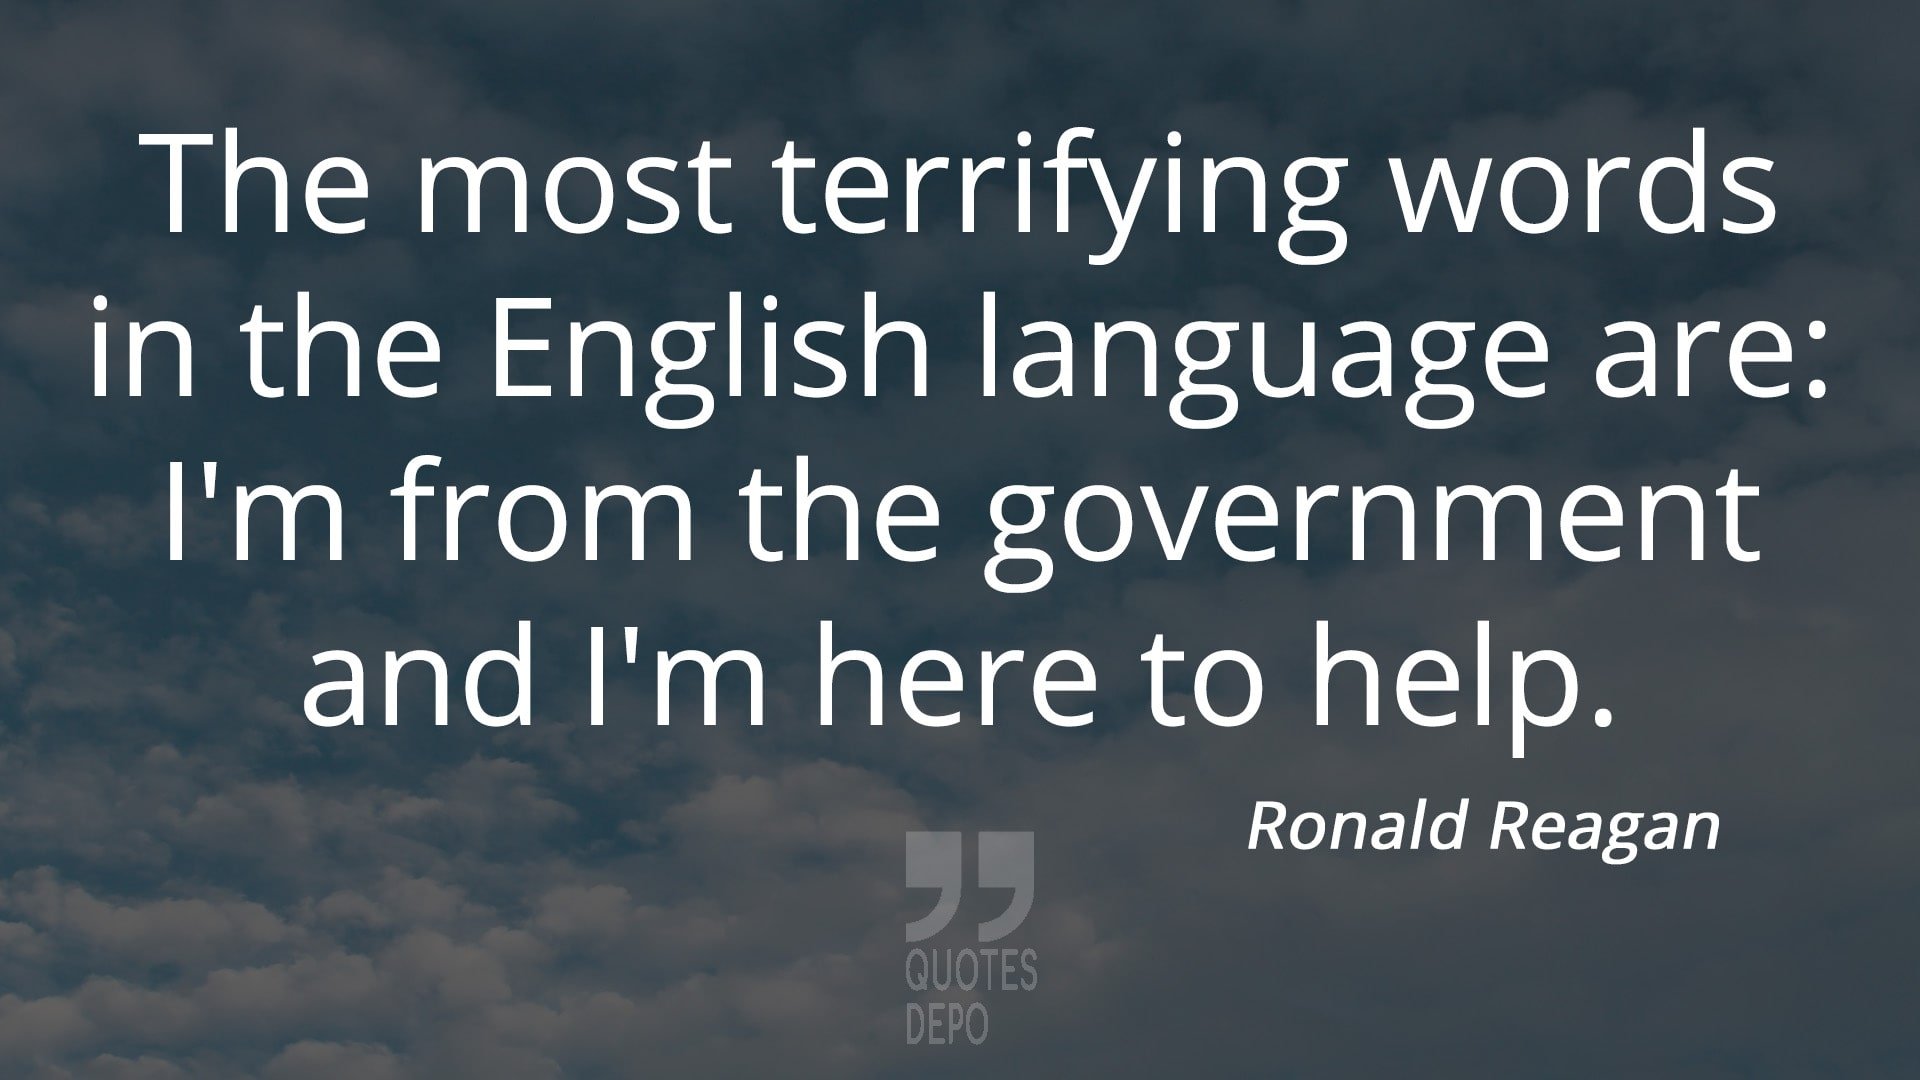 i'm from the government and i'm here to help - ronald reagan quotes